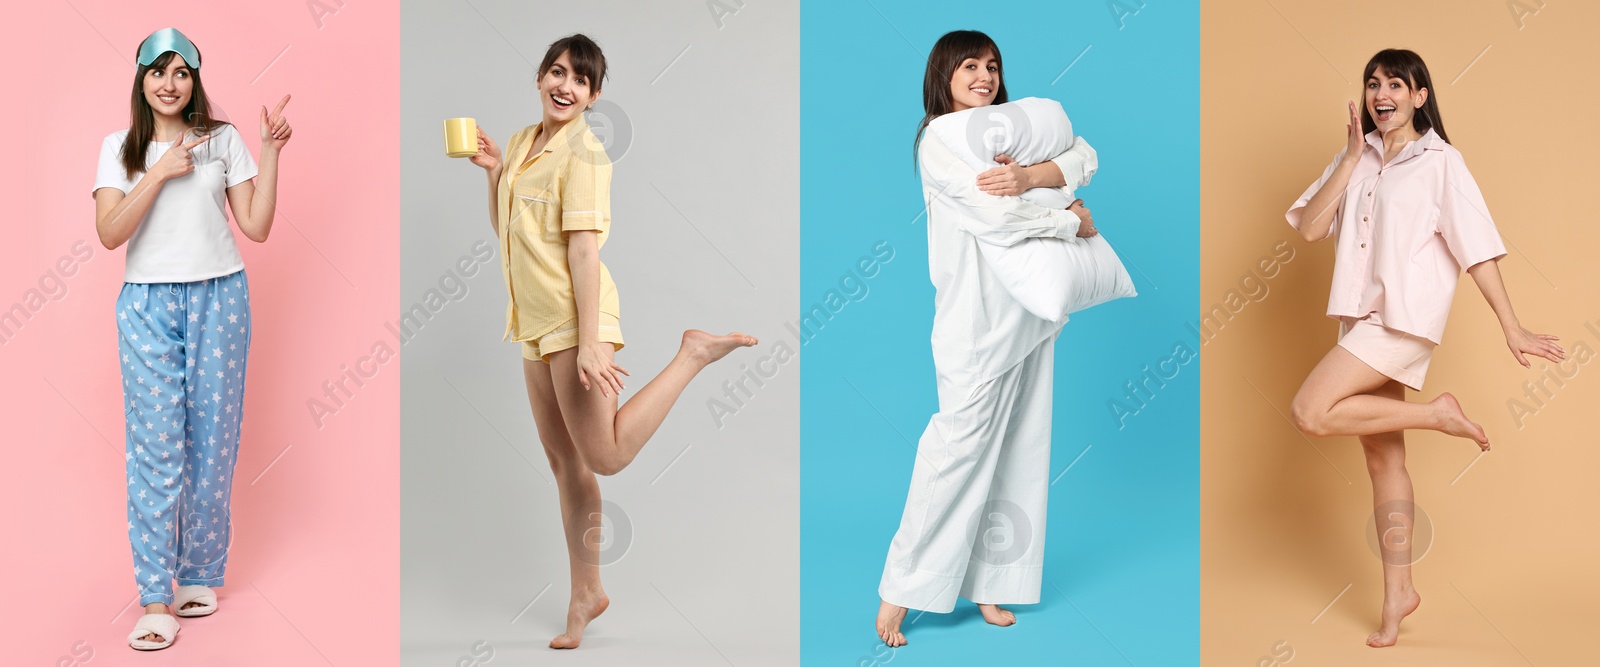 Image of Woman in pajamas on different color backgrounds, collage of photos